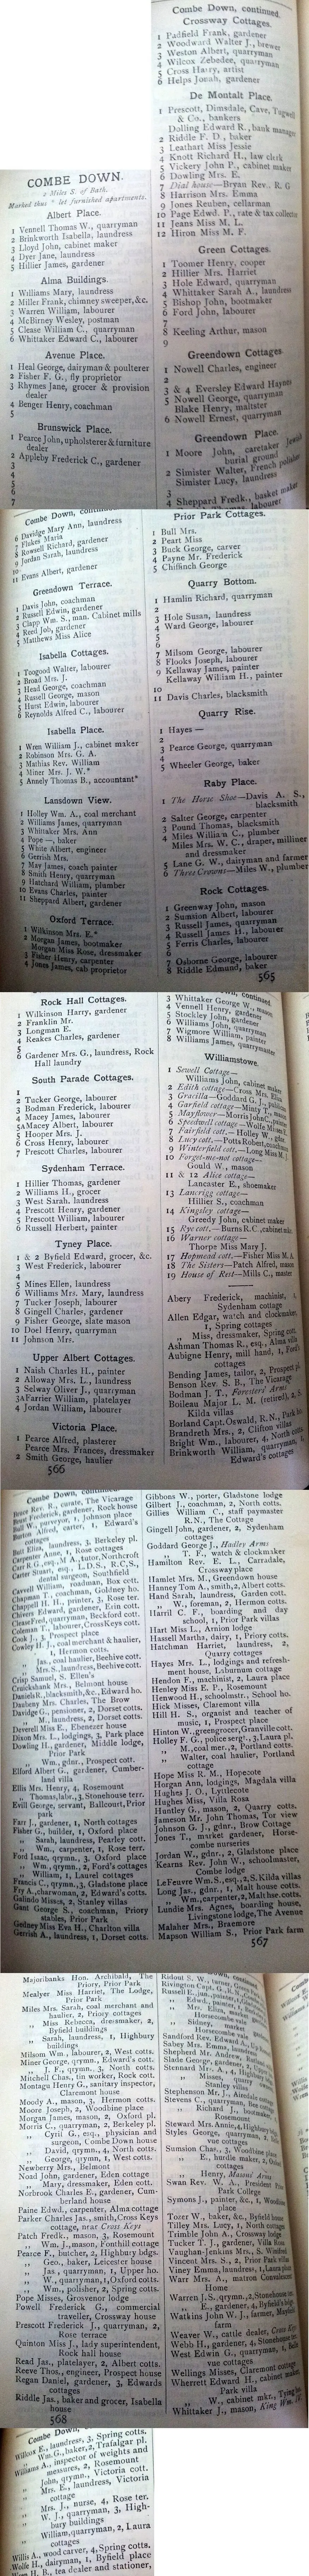 1899 post office directory for combe down